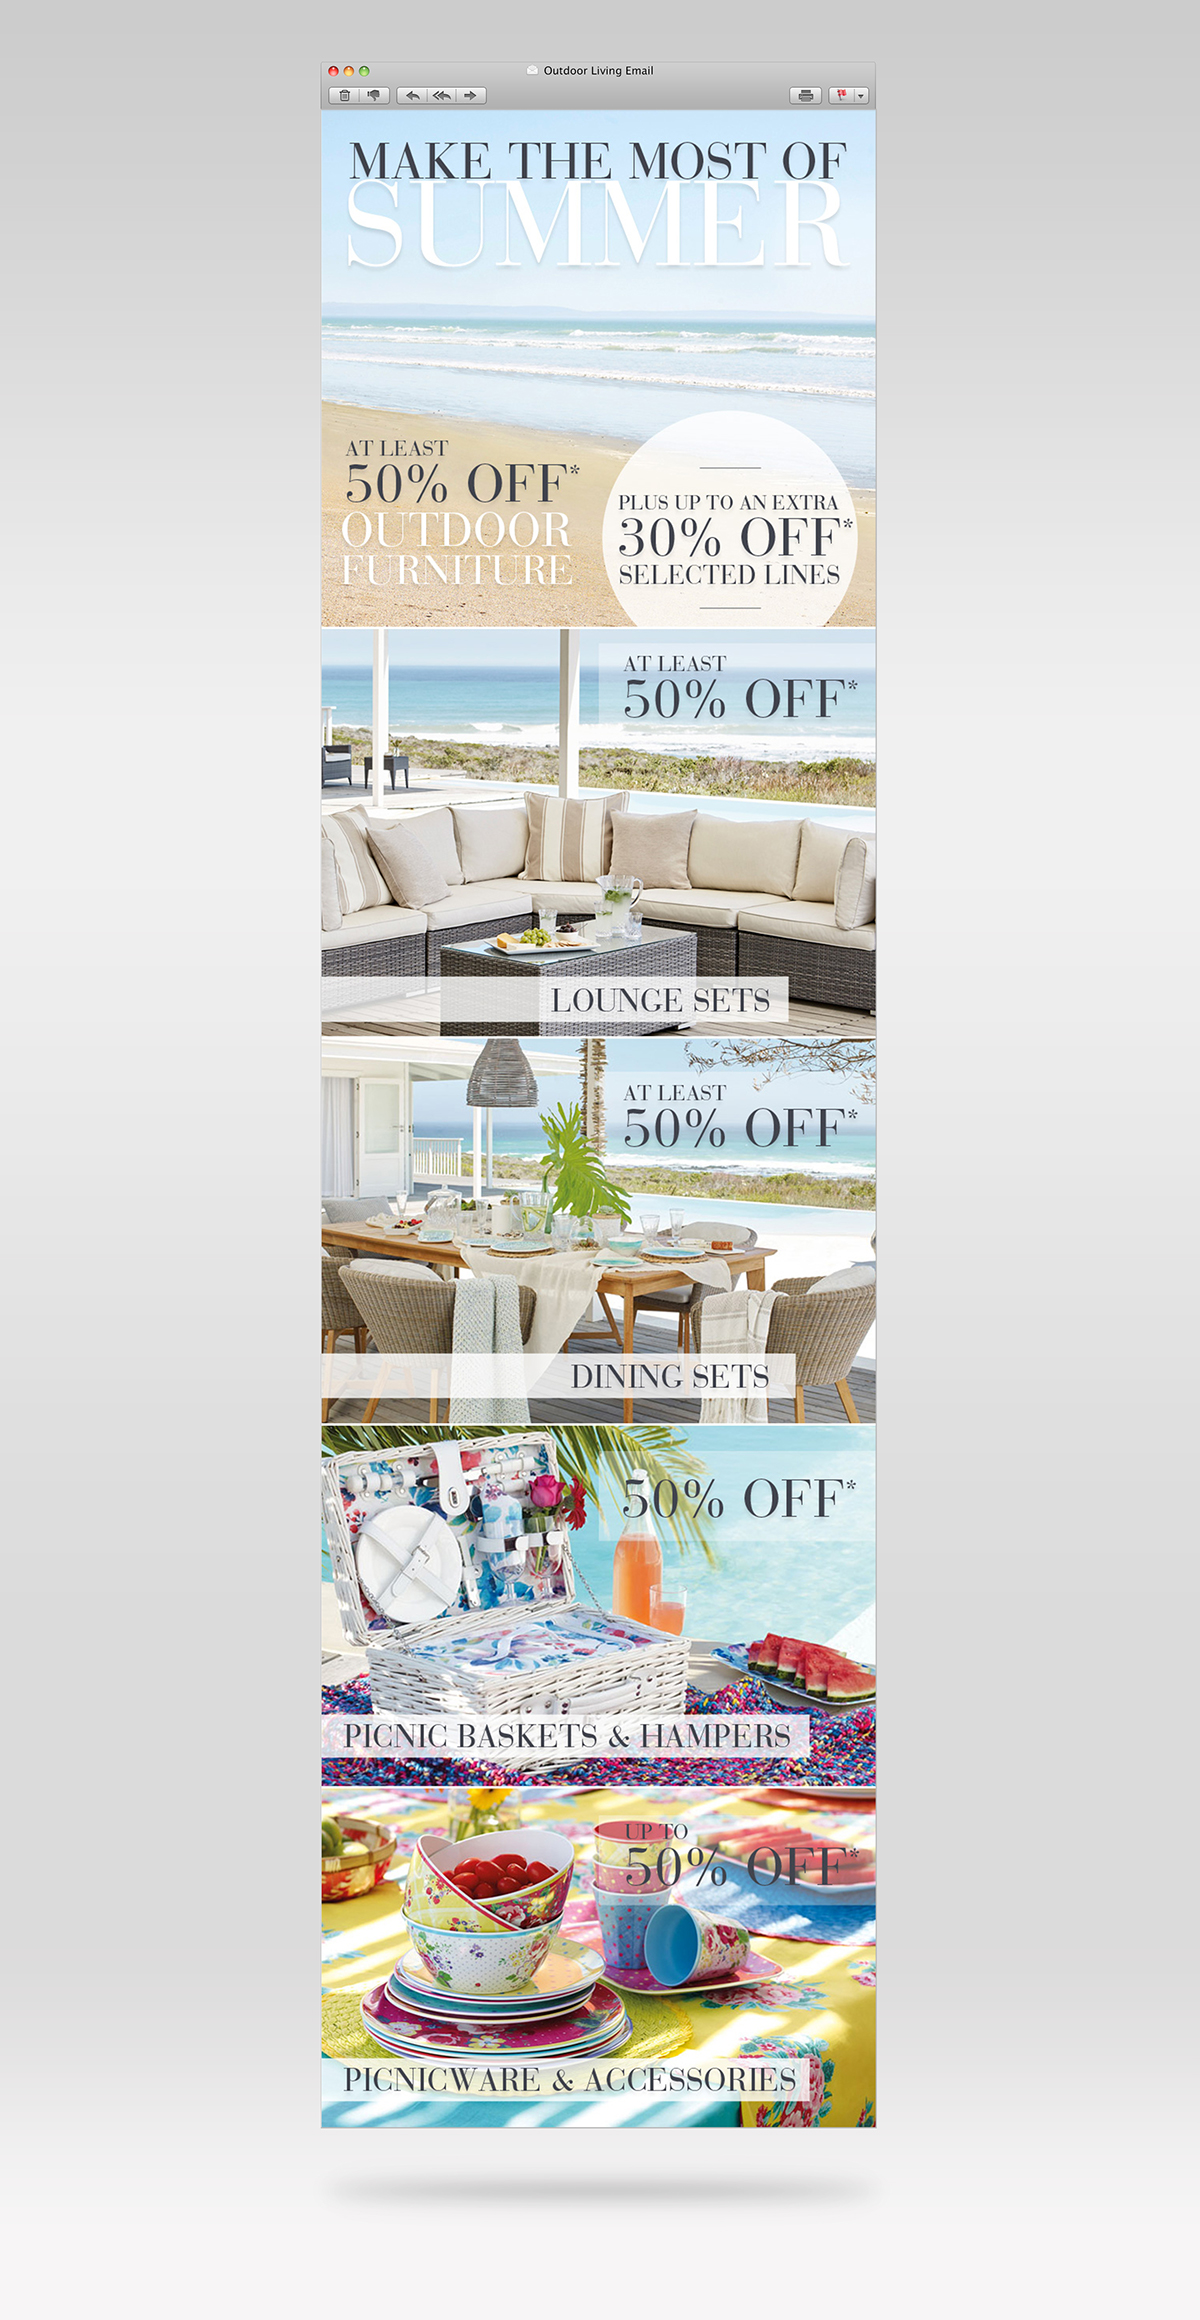 Email Design Retail womenswear home furniture Layout